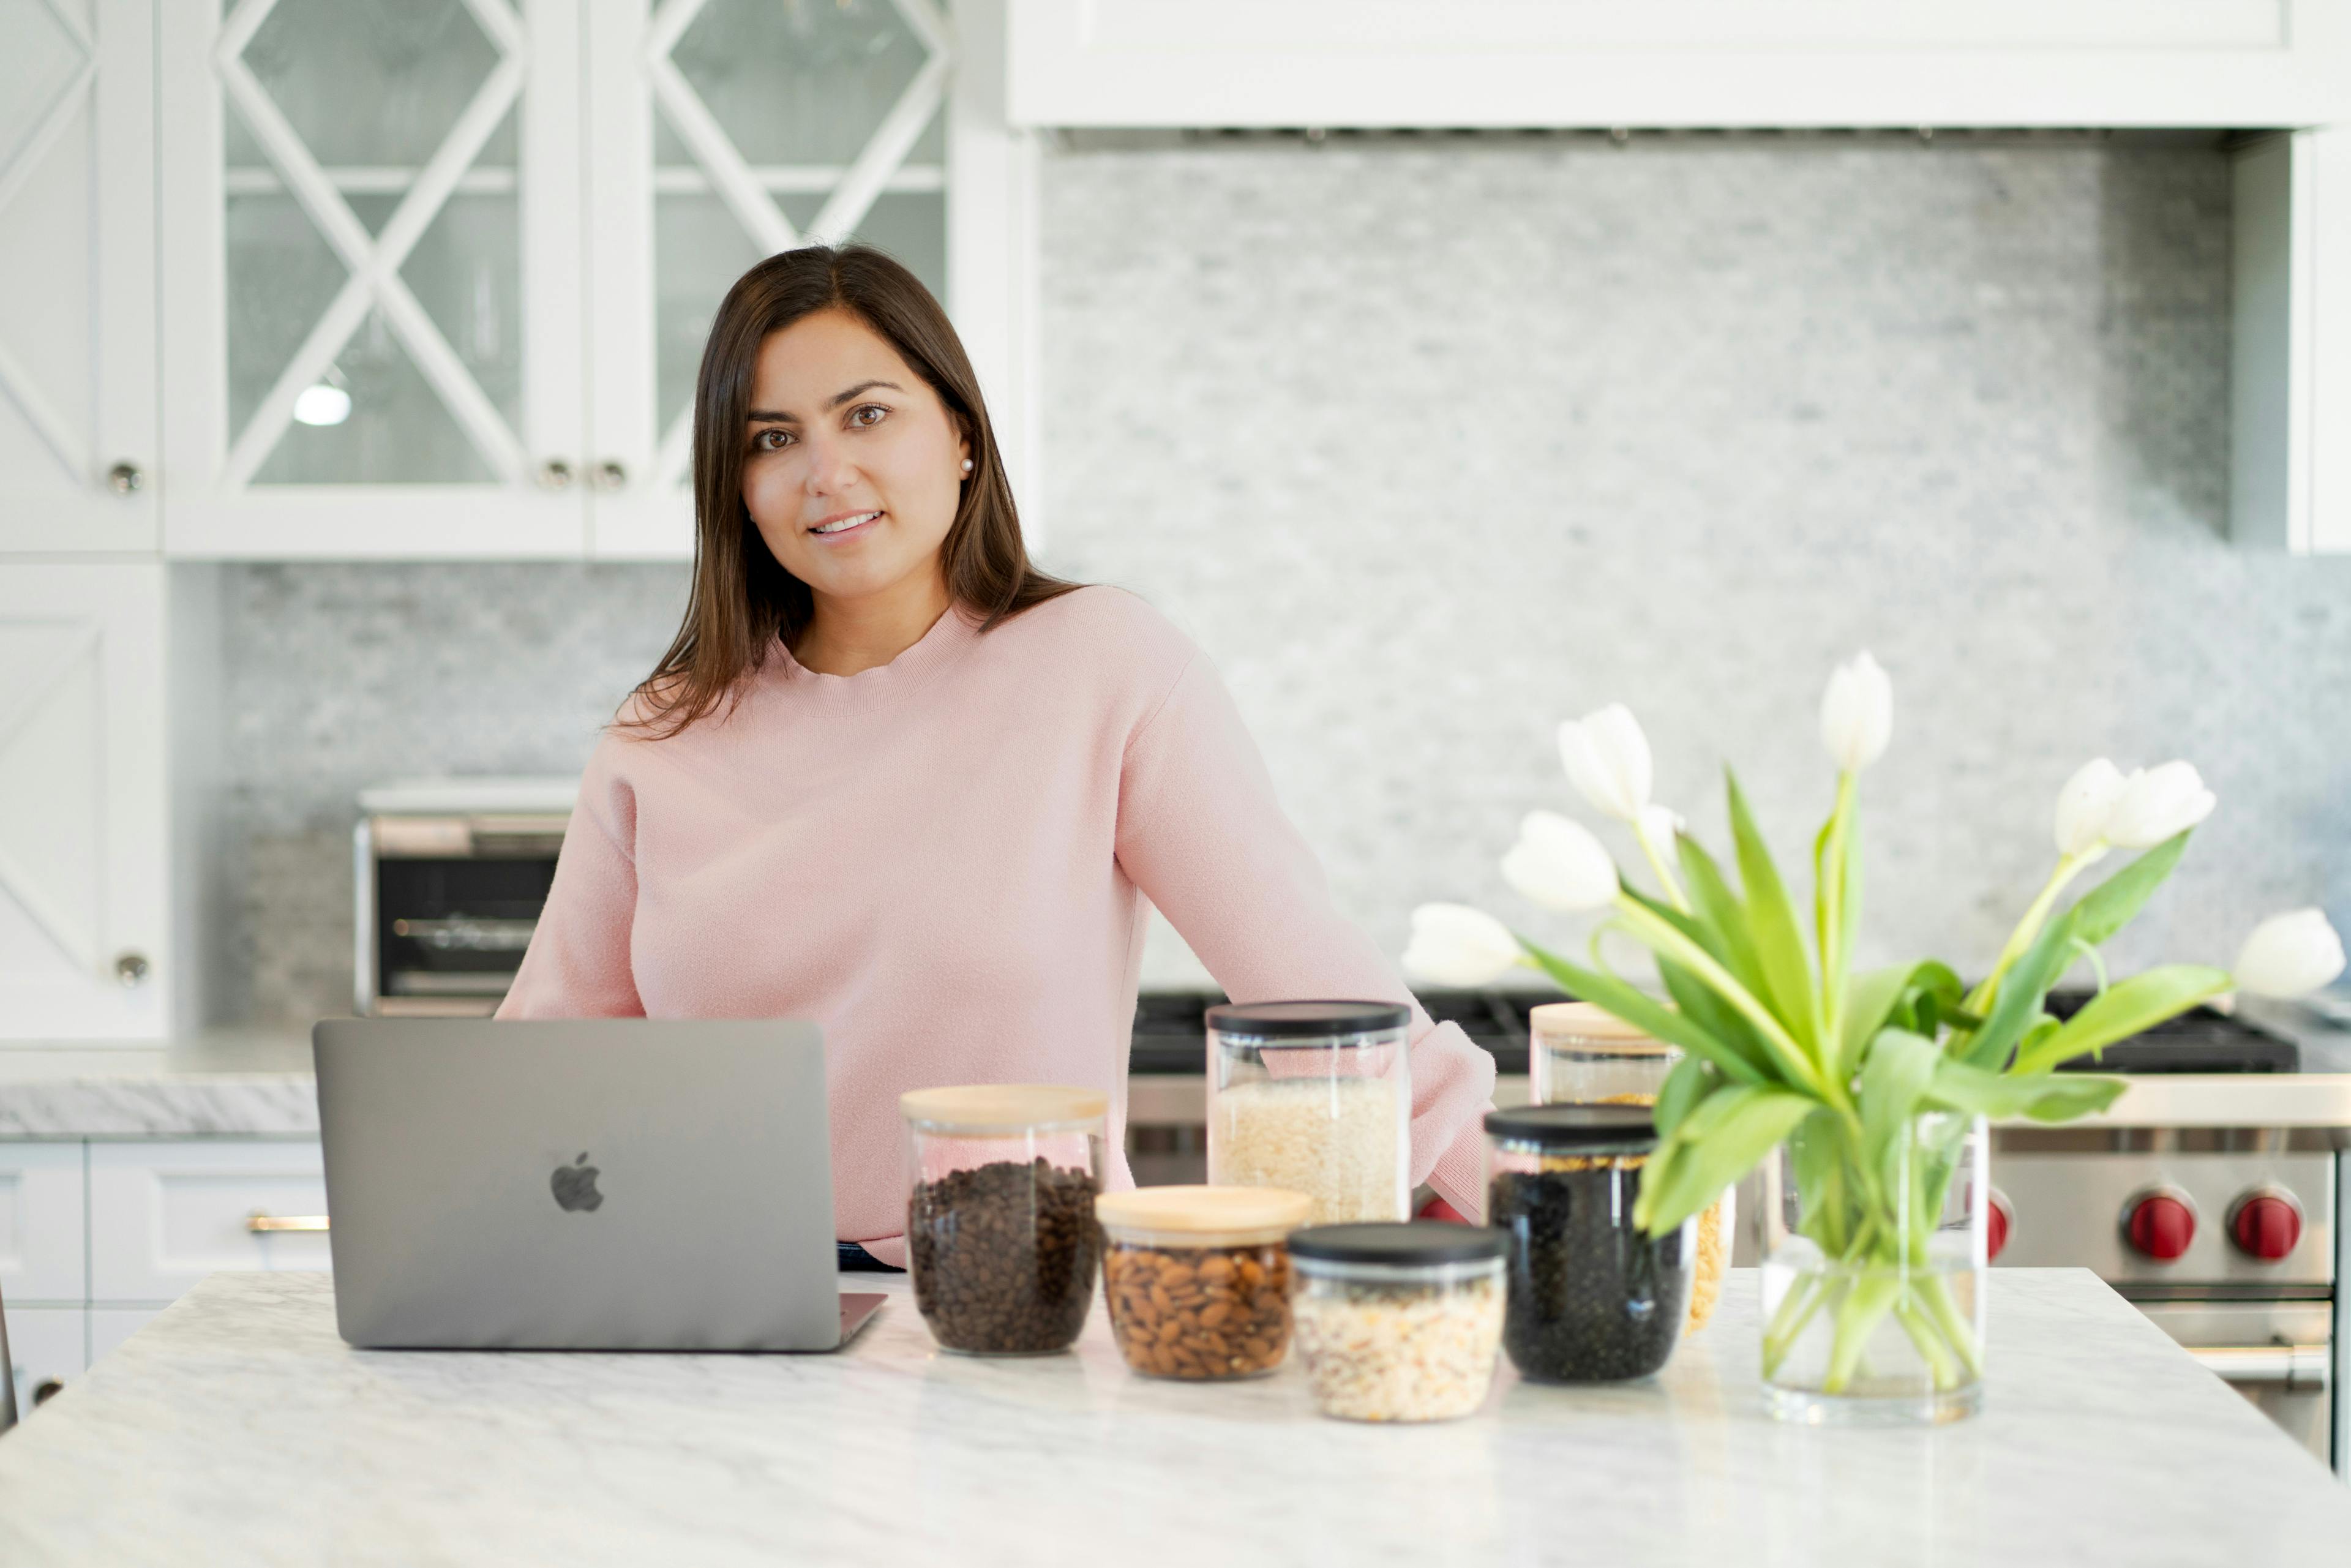 Andrea Brink wearing a soft pink sweater, stands behind a marble kitchen counter. She leans slightly towards an open laptop, showing an engaged expression. To her right, there are clear jars with various kitchen staples like rice, coffee beans, and almonds. A vase with white tulips adds a fresh touch to the serene kitchen setting, which features white cabinetry and a modern backsplash.